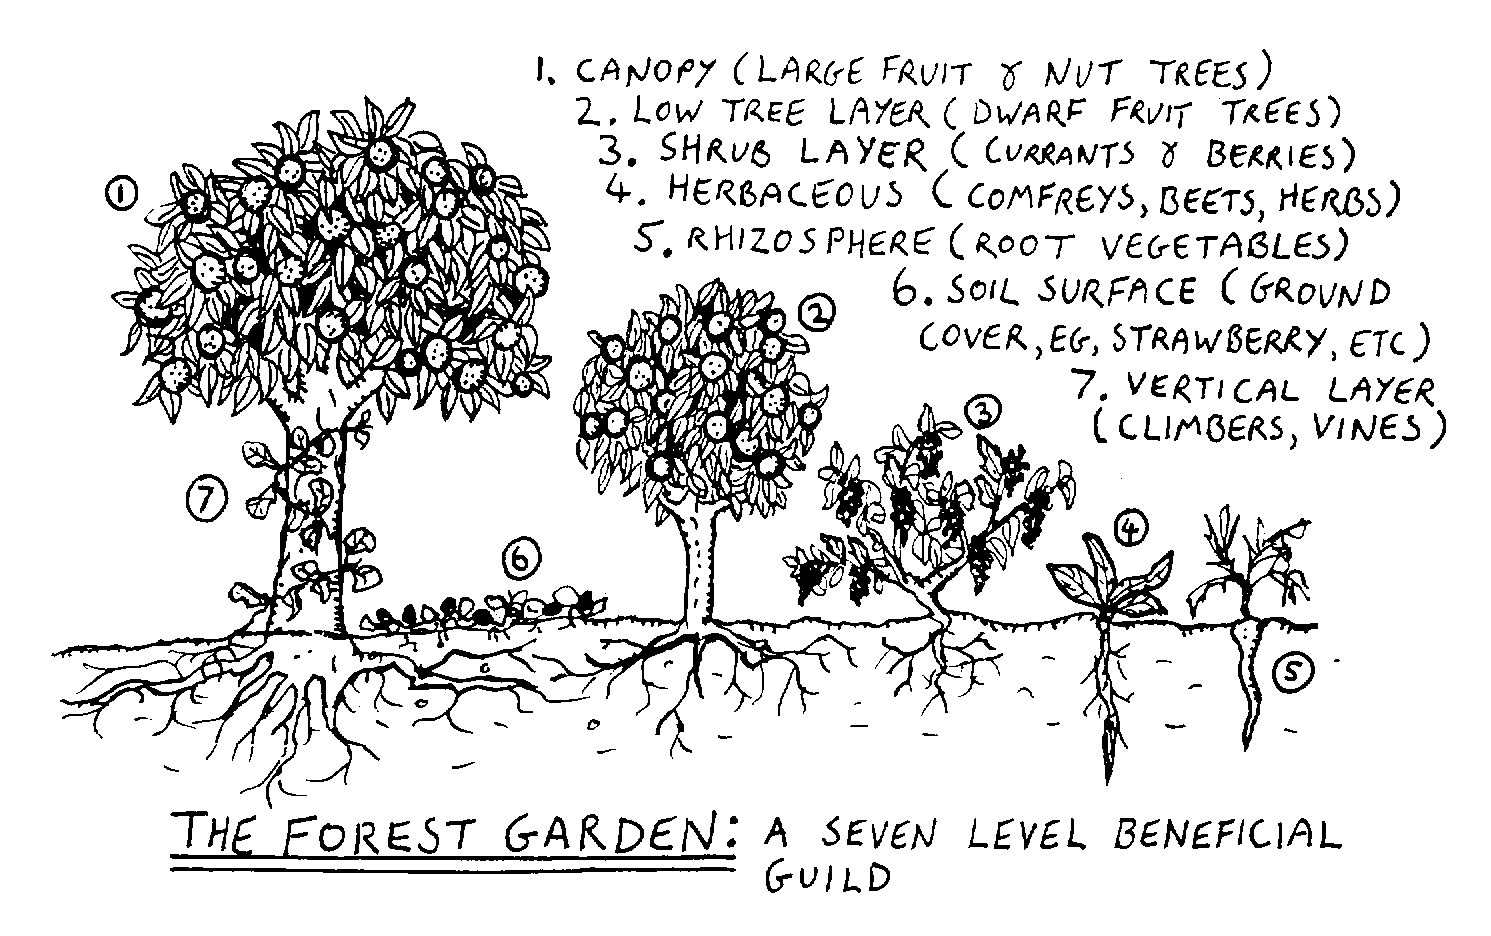 Permaculture Food Forest Layers. Diagram by Graham Burnett, (Reusing this file) Released under the GNU Free Documentation License.